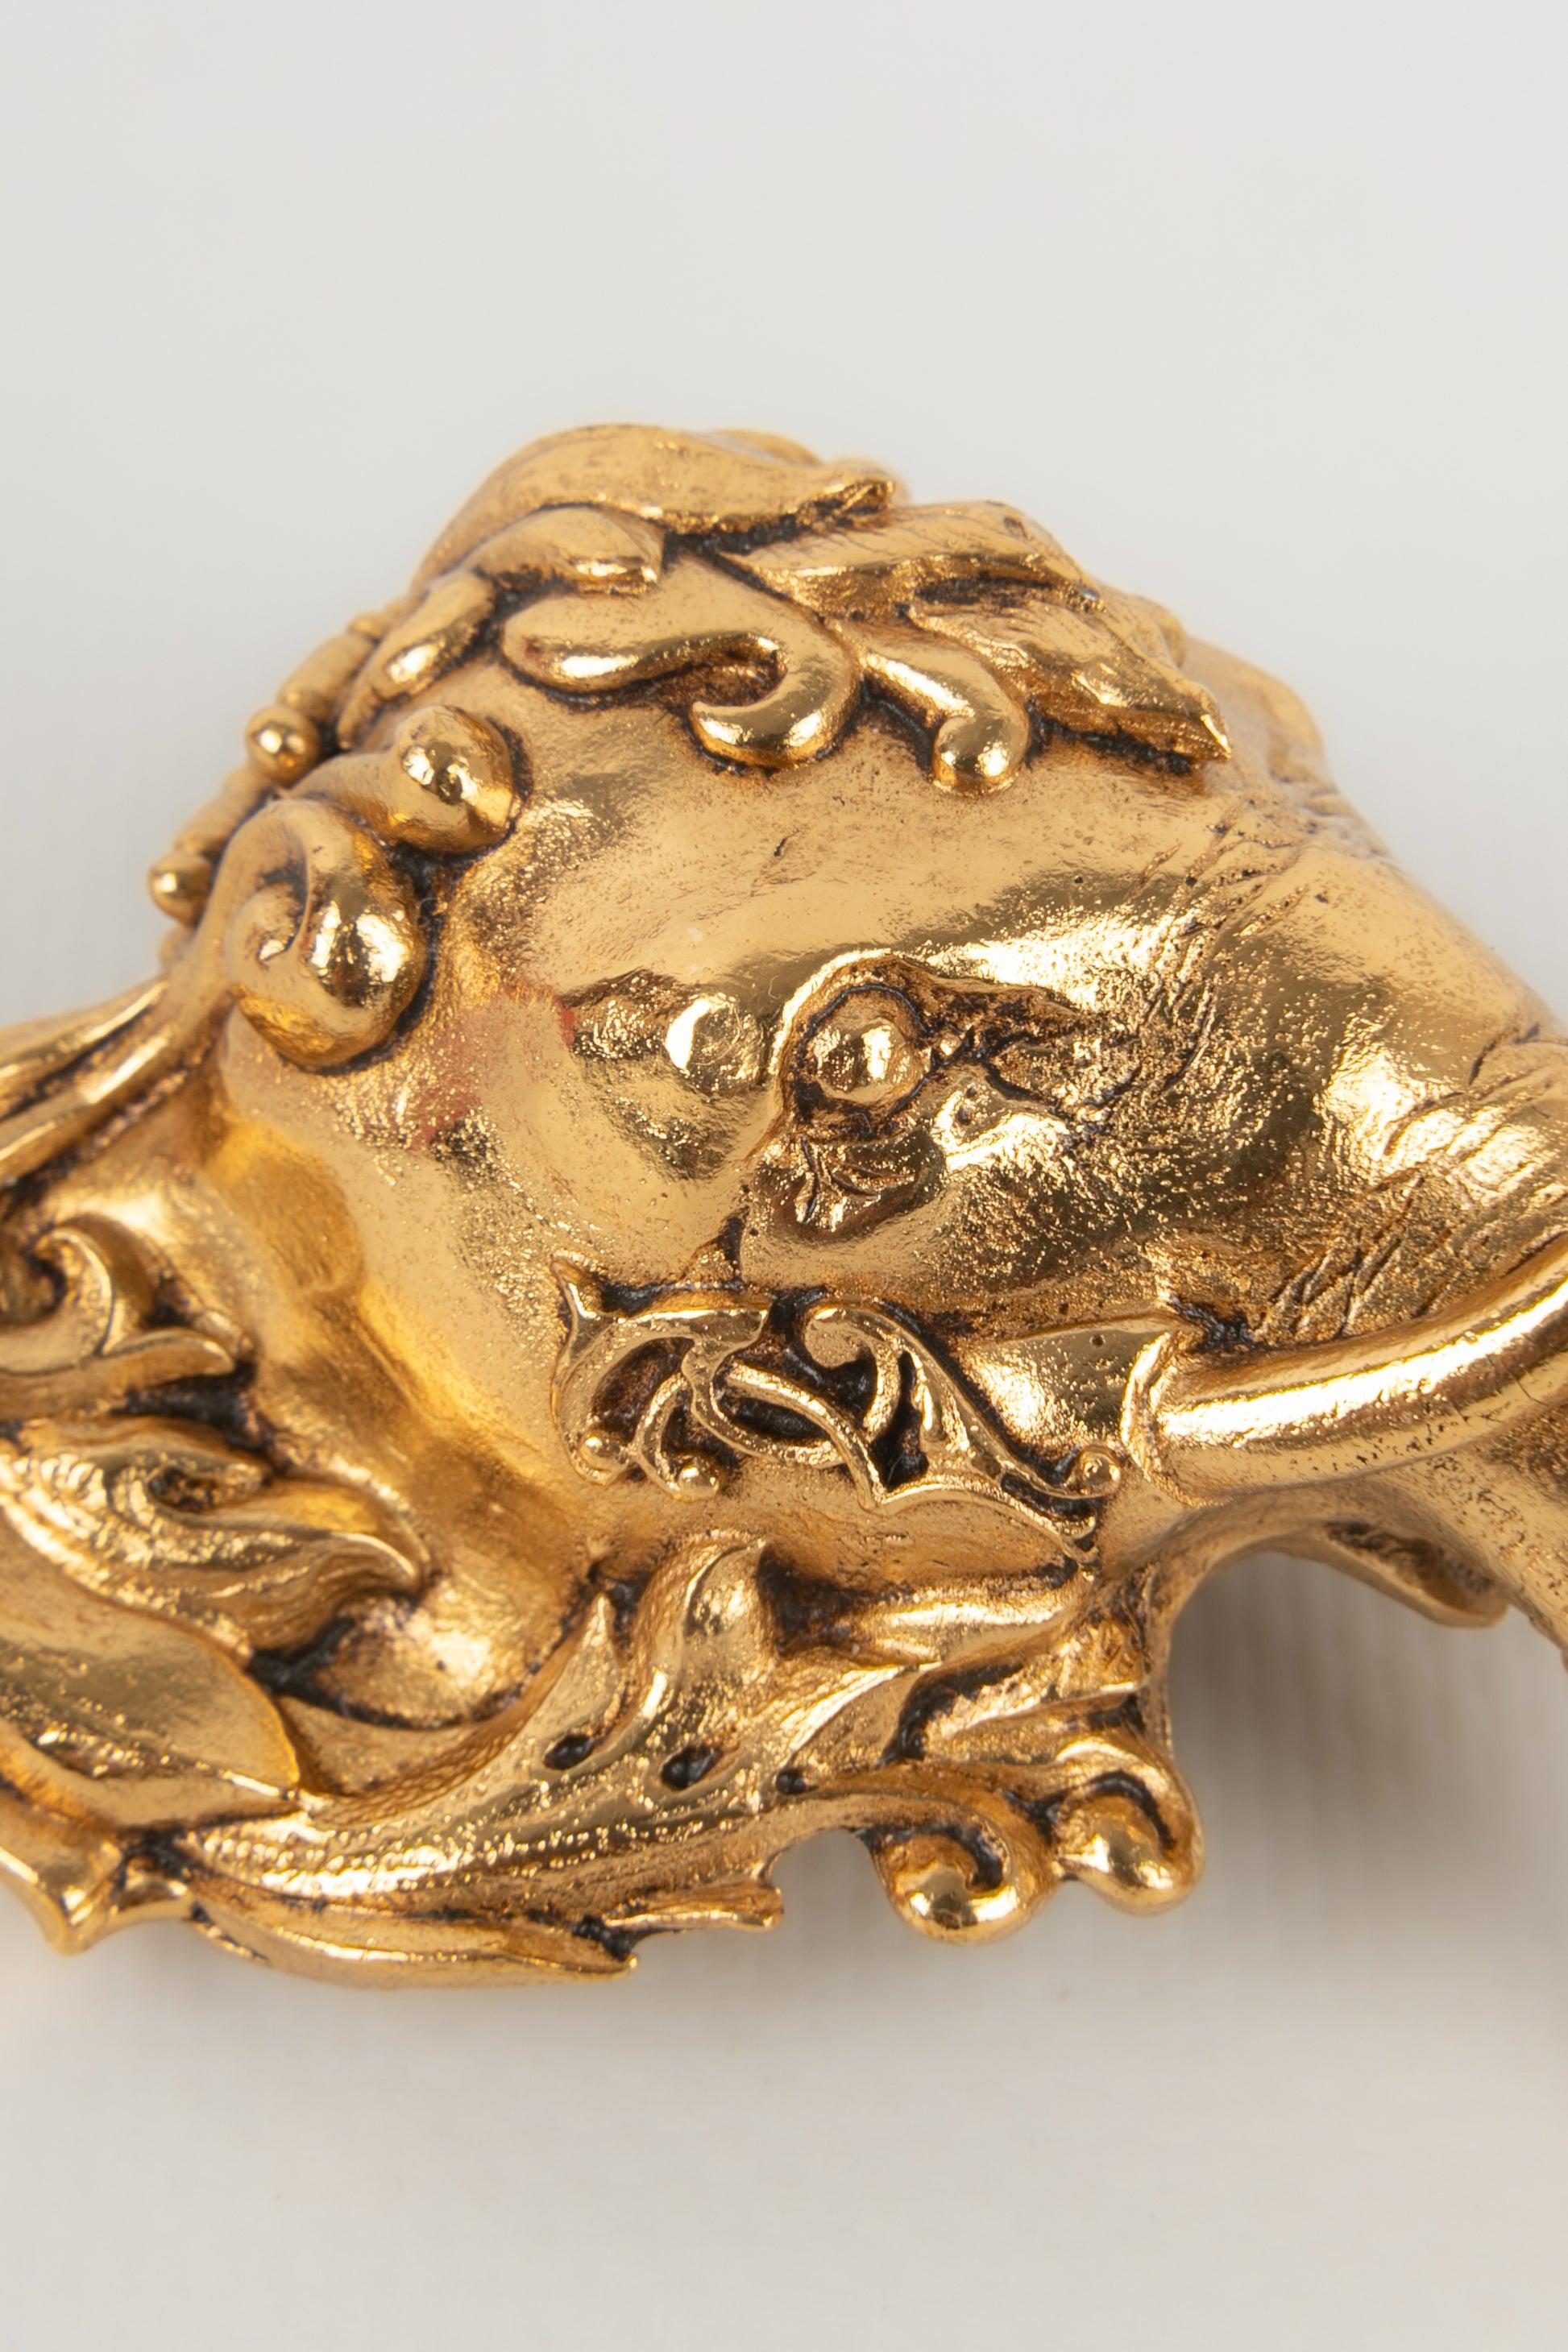 Christian Dior Gold-Plated Metal Pendant Brooch Depicting an Elephant Head For Sale 3